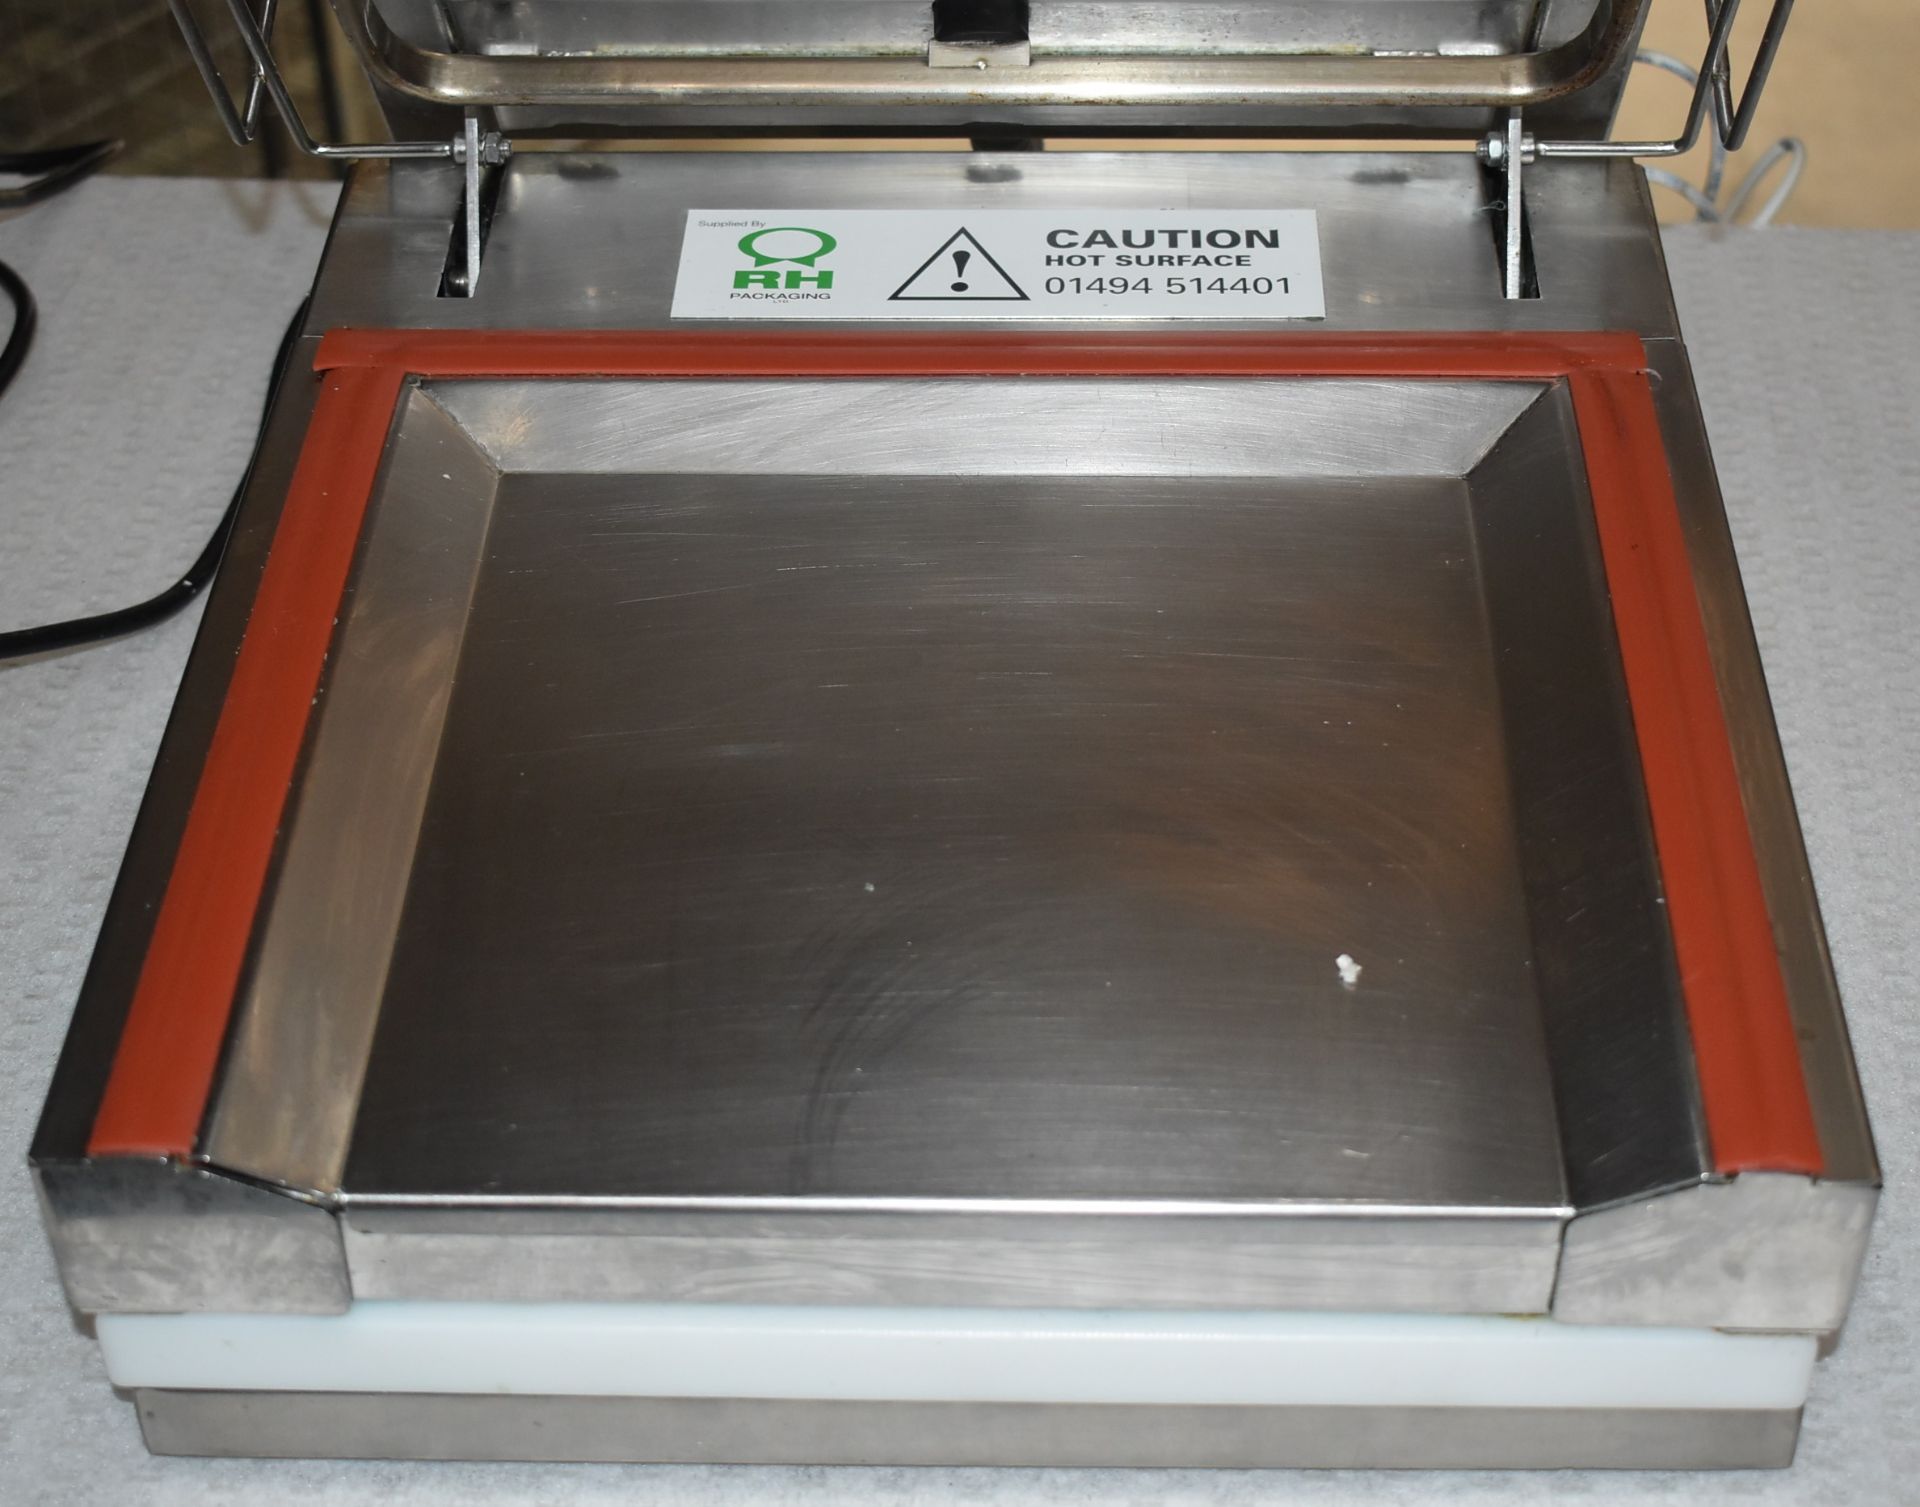 1 x Mistral 350 Heat Sealing Machine For Fish, Meats and More - Recently Removed From a Major - Image 3 of 10